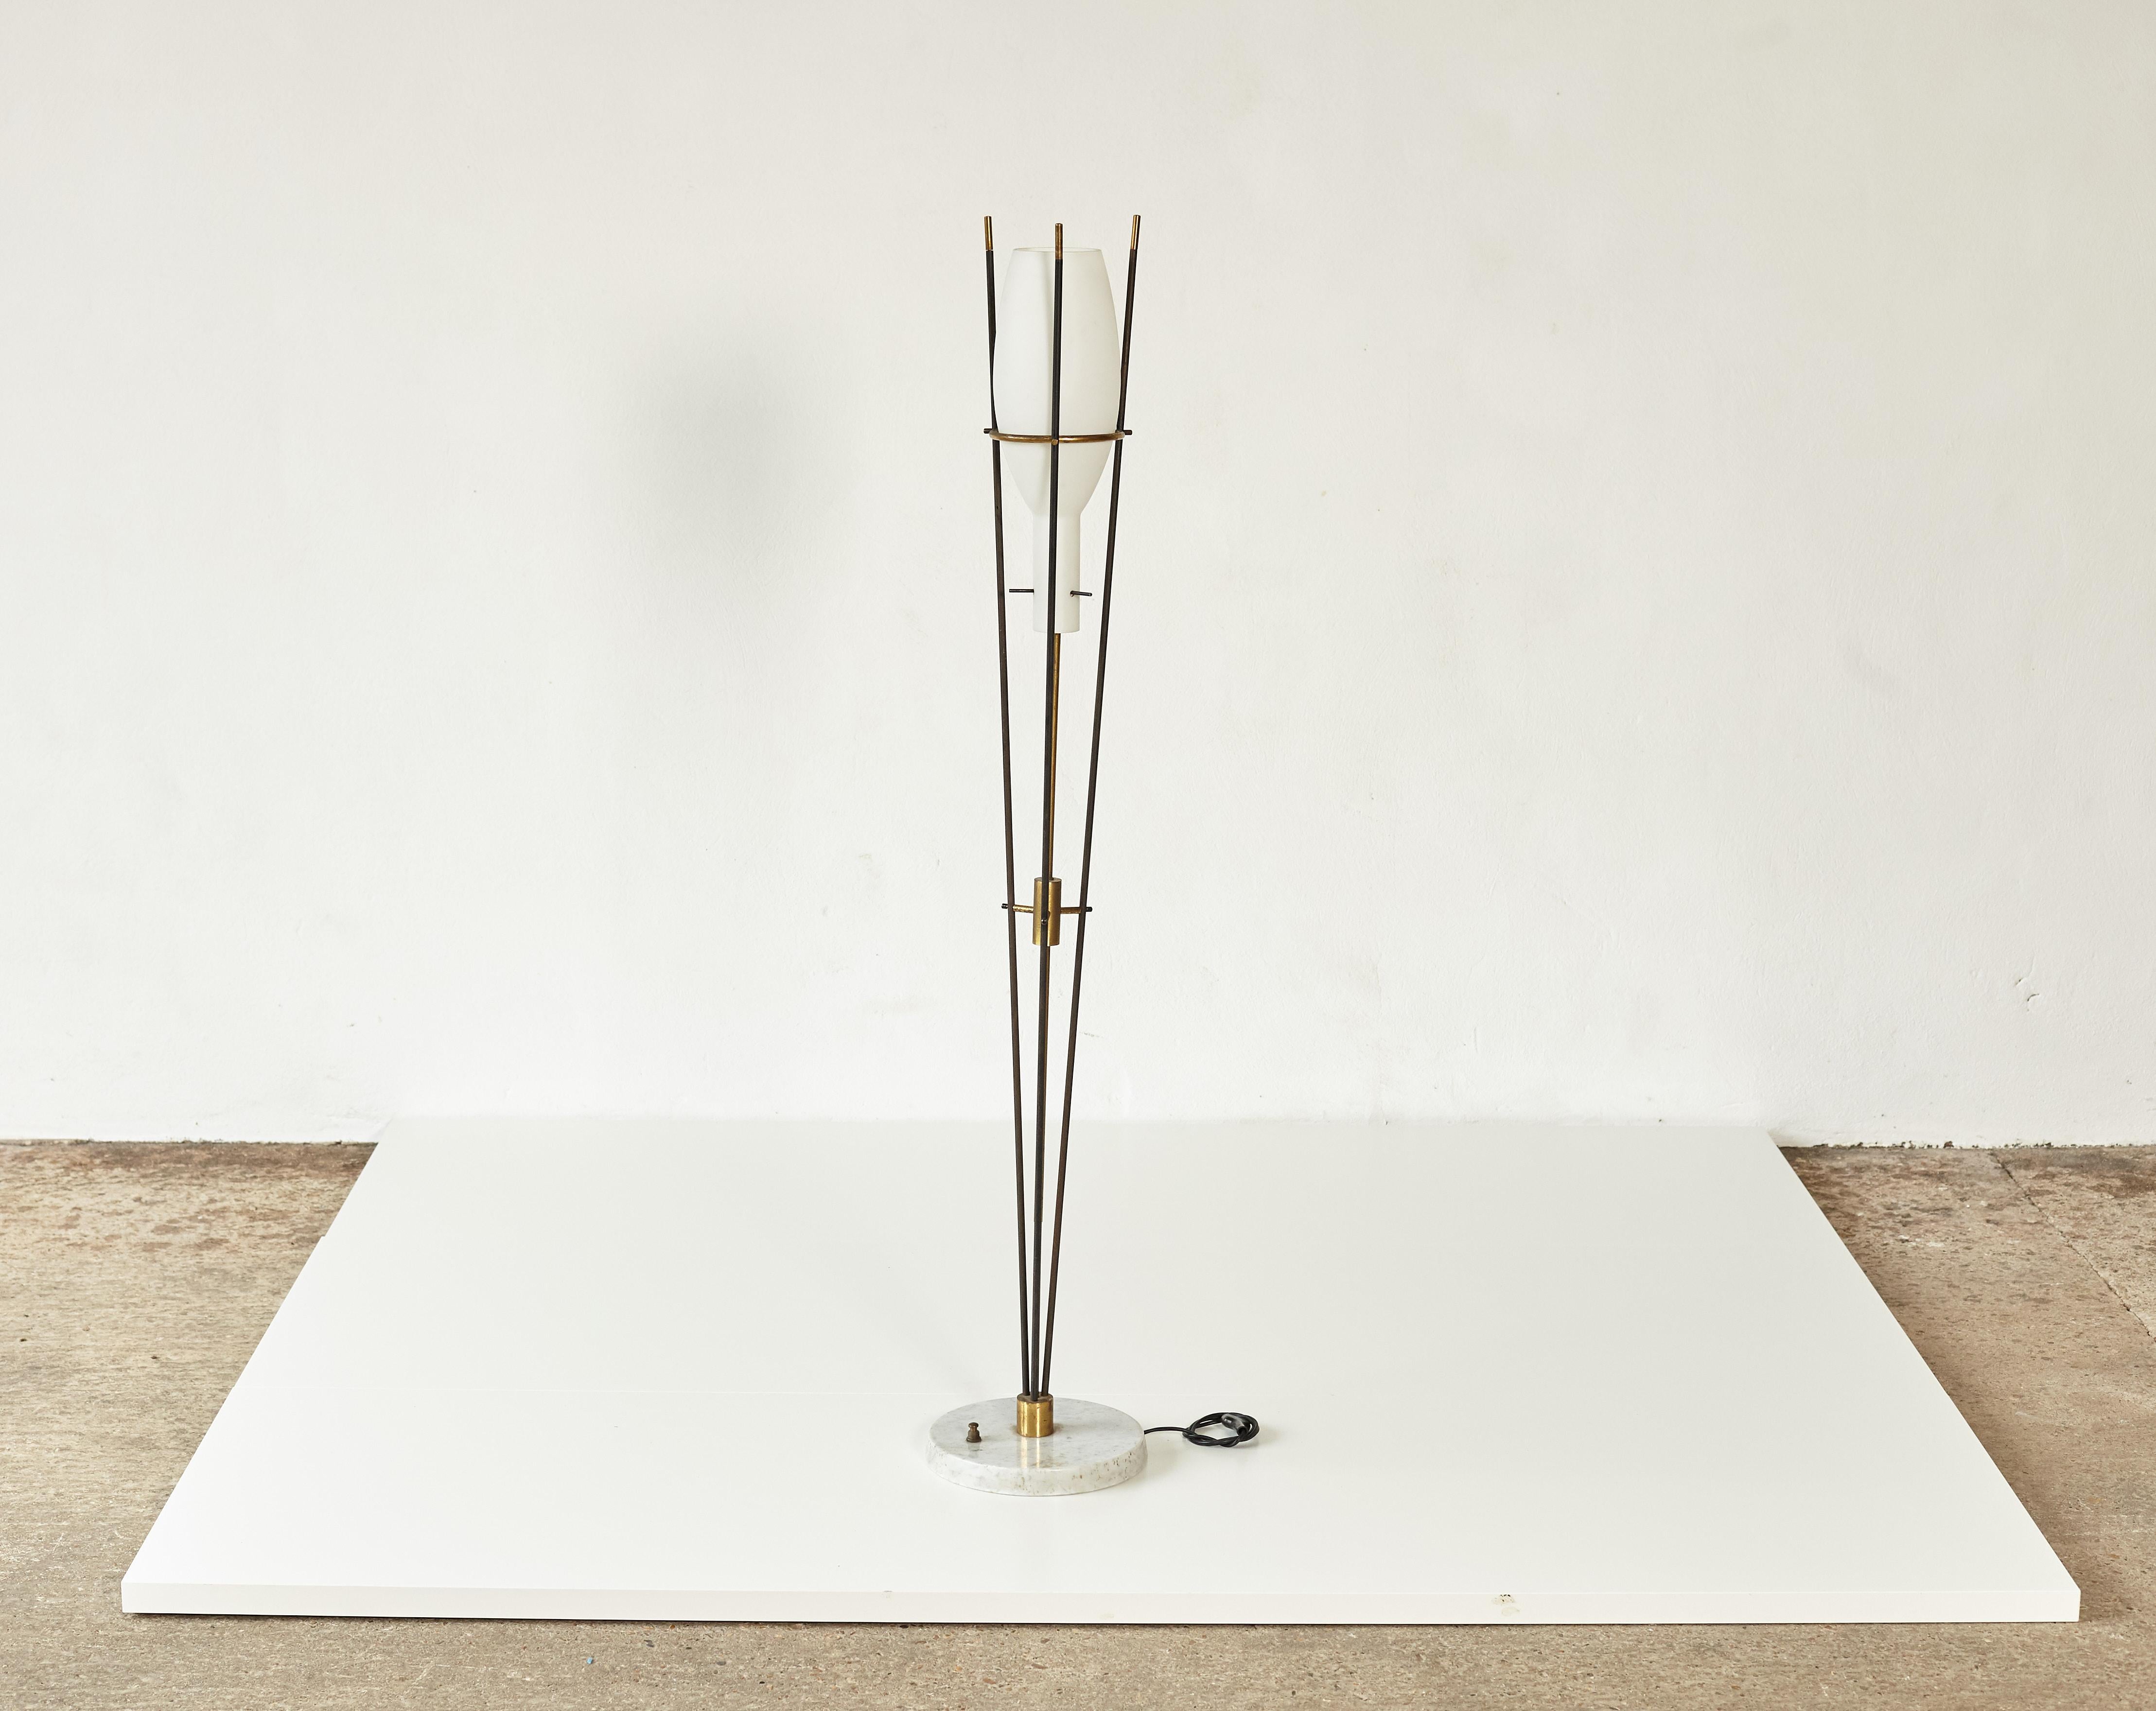 A very rare Stilnovo floor lamp from Italy in the 1950s. Marble base, brass and metal frame and opaline glass shade. In good original vintage condition. Local rewiring before use is recommended. Ships worldwide - please contact us directly for